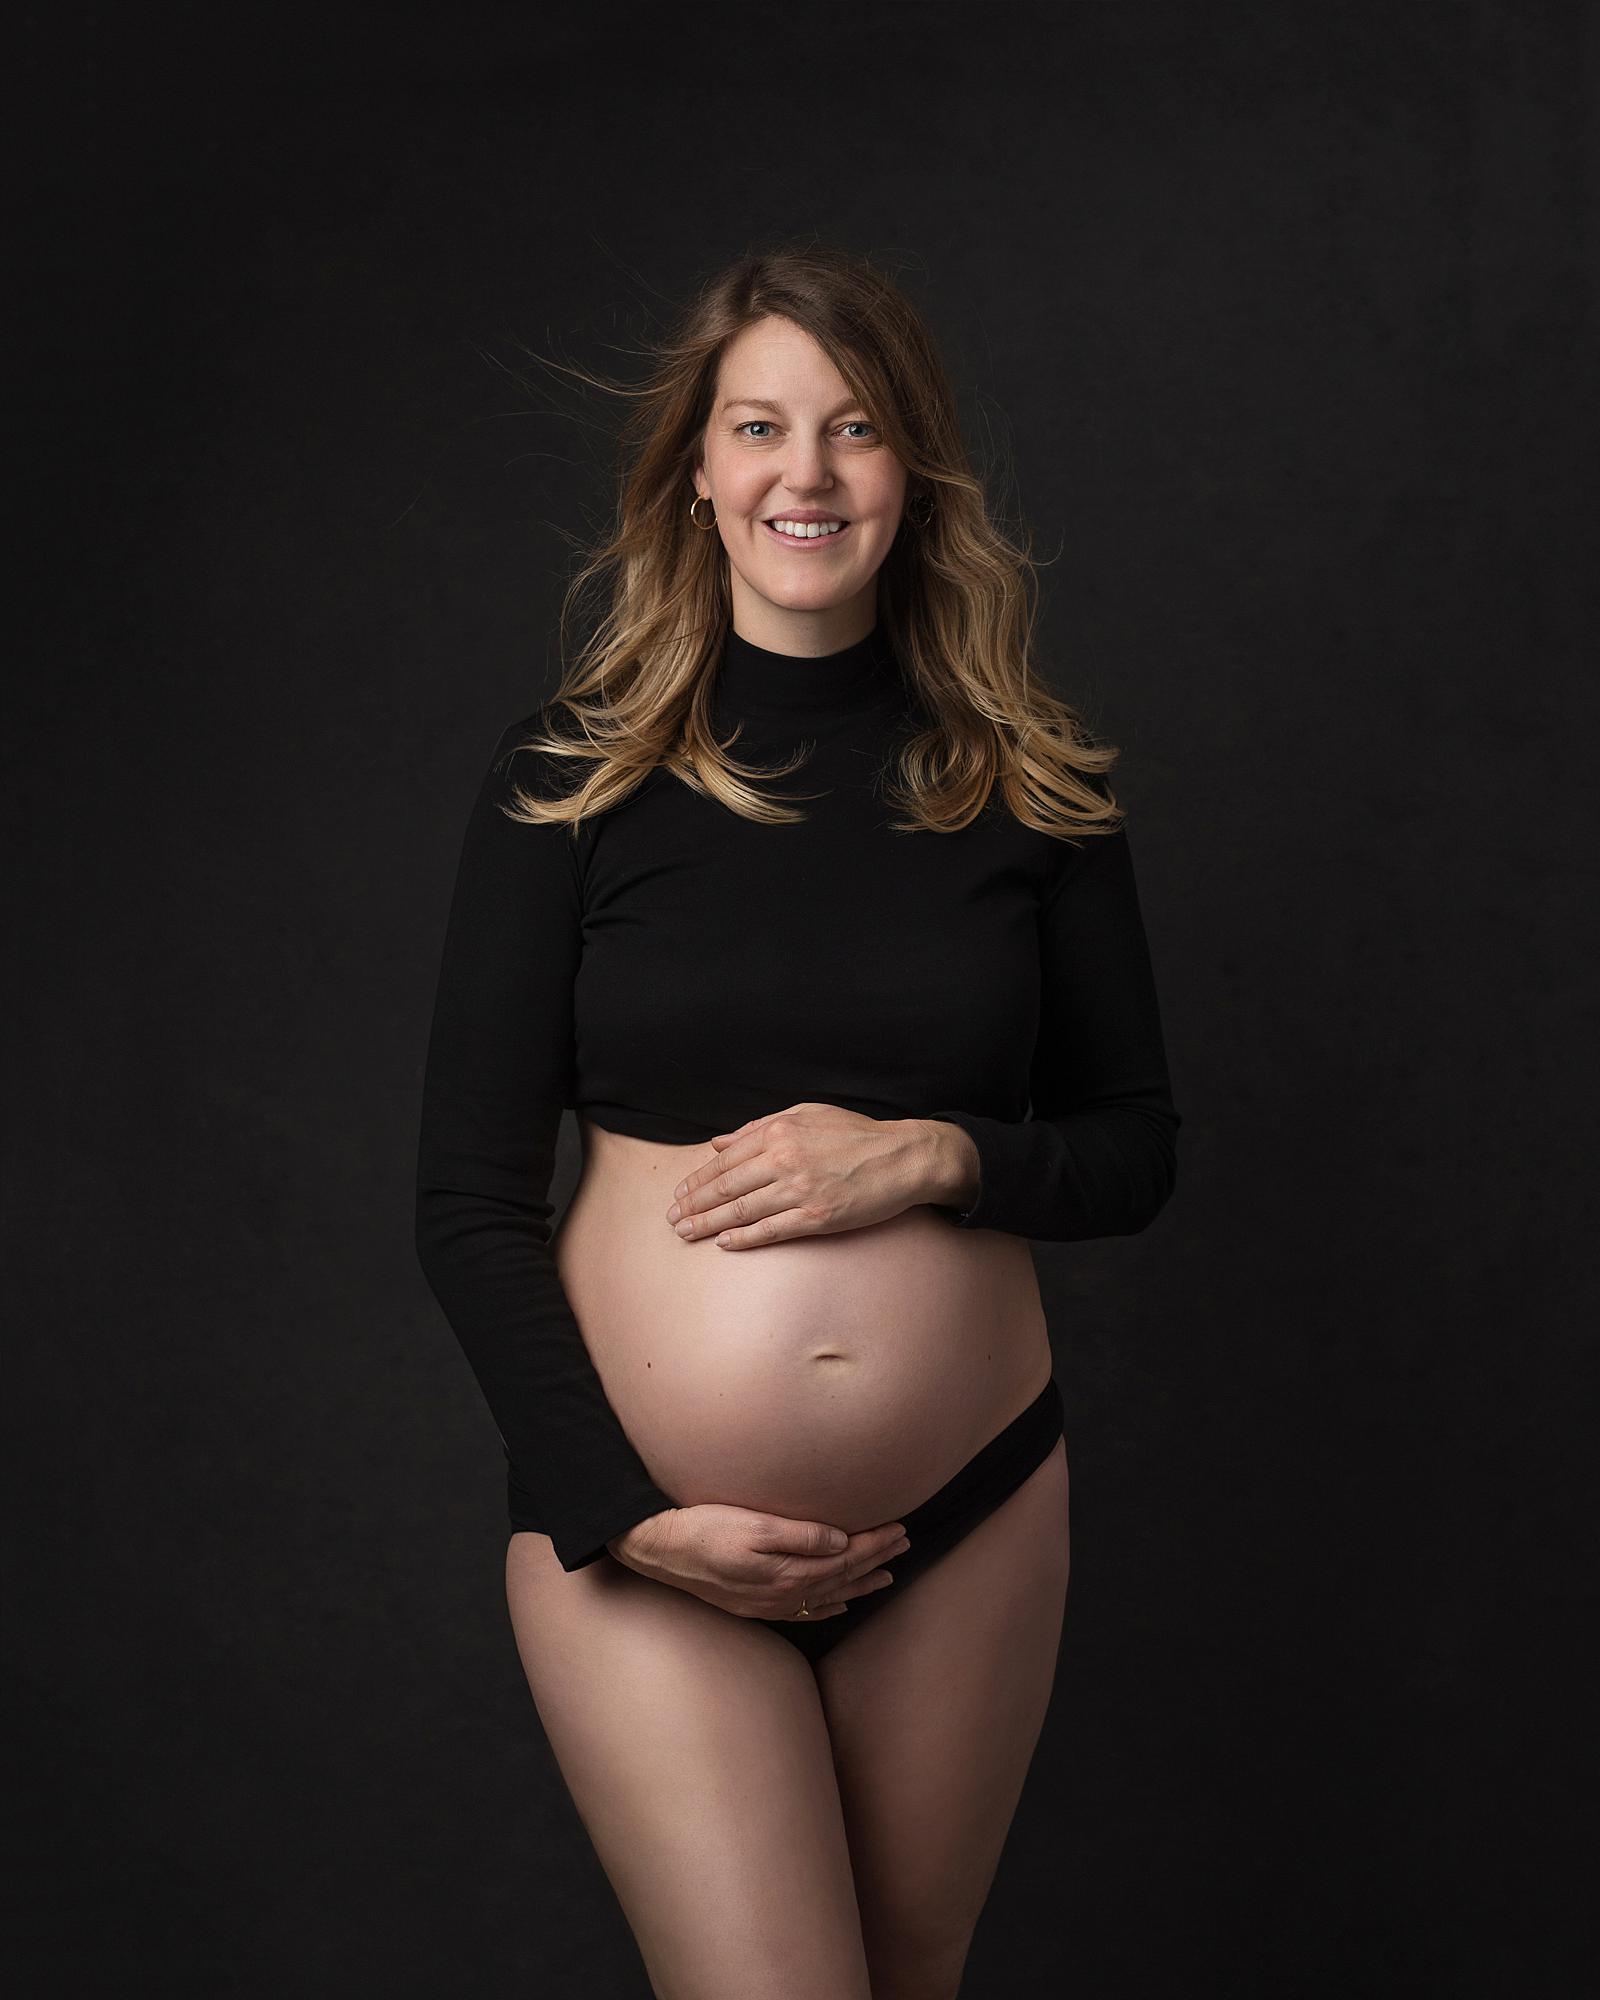 Pregnant woman posing in a black top and pants for a maternity photoshoot in Alison McKenny's Suffolk studio